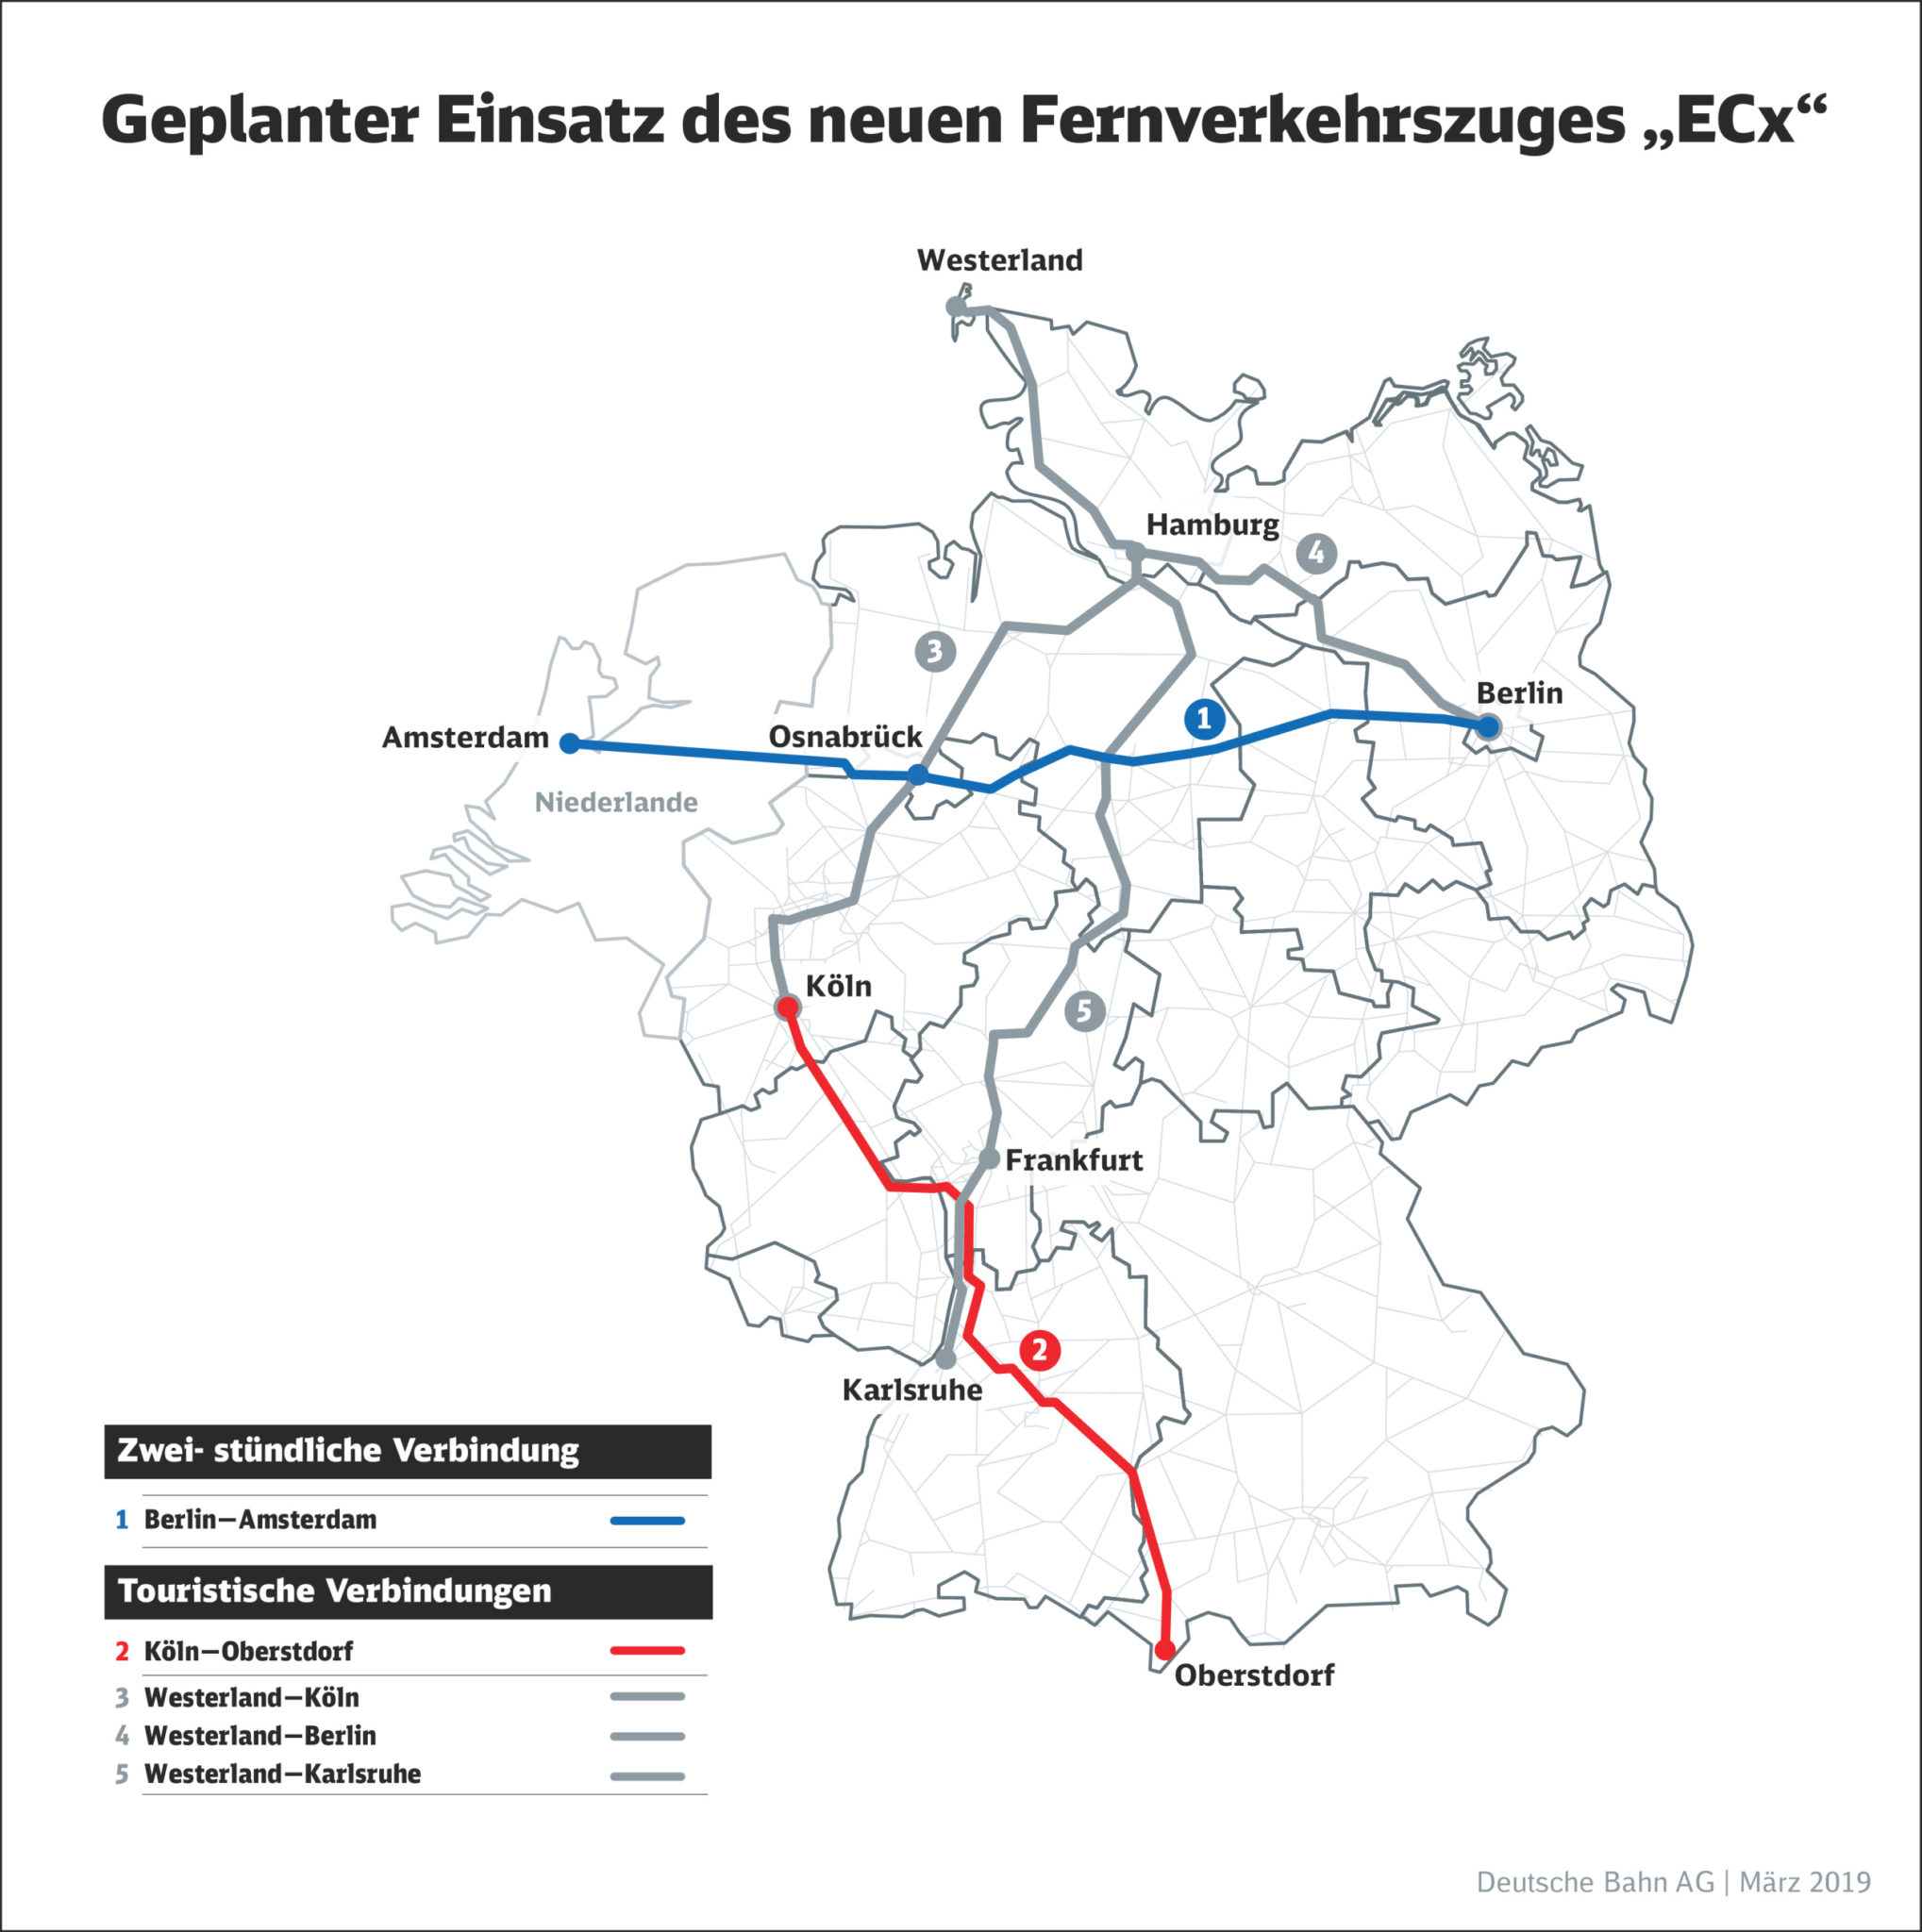 Planned routes for the ECx